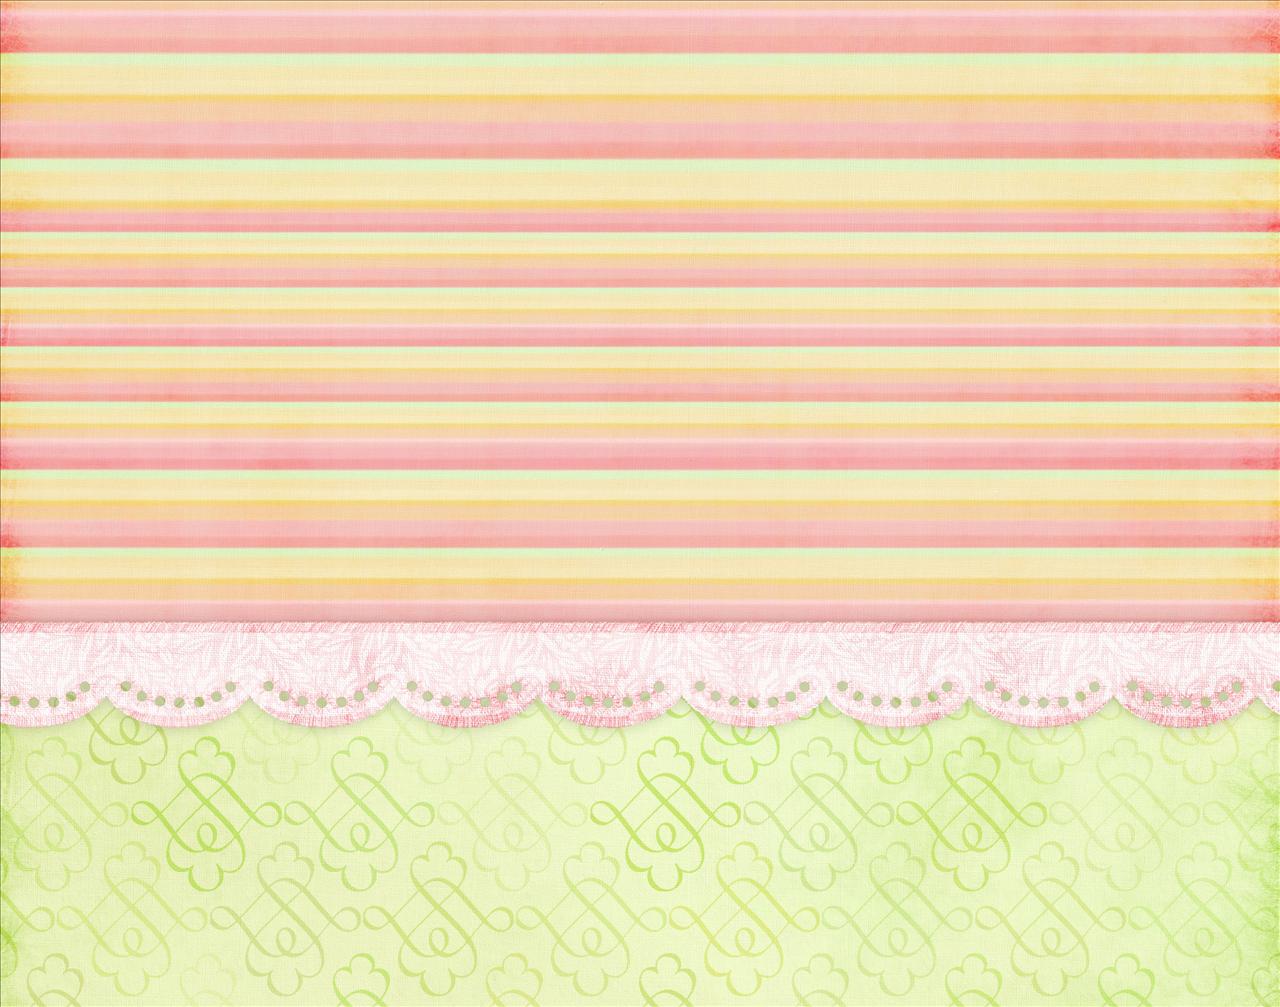 Green and Spring Backgrounds